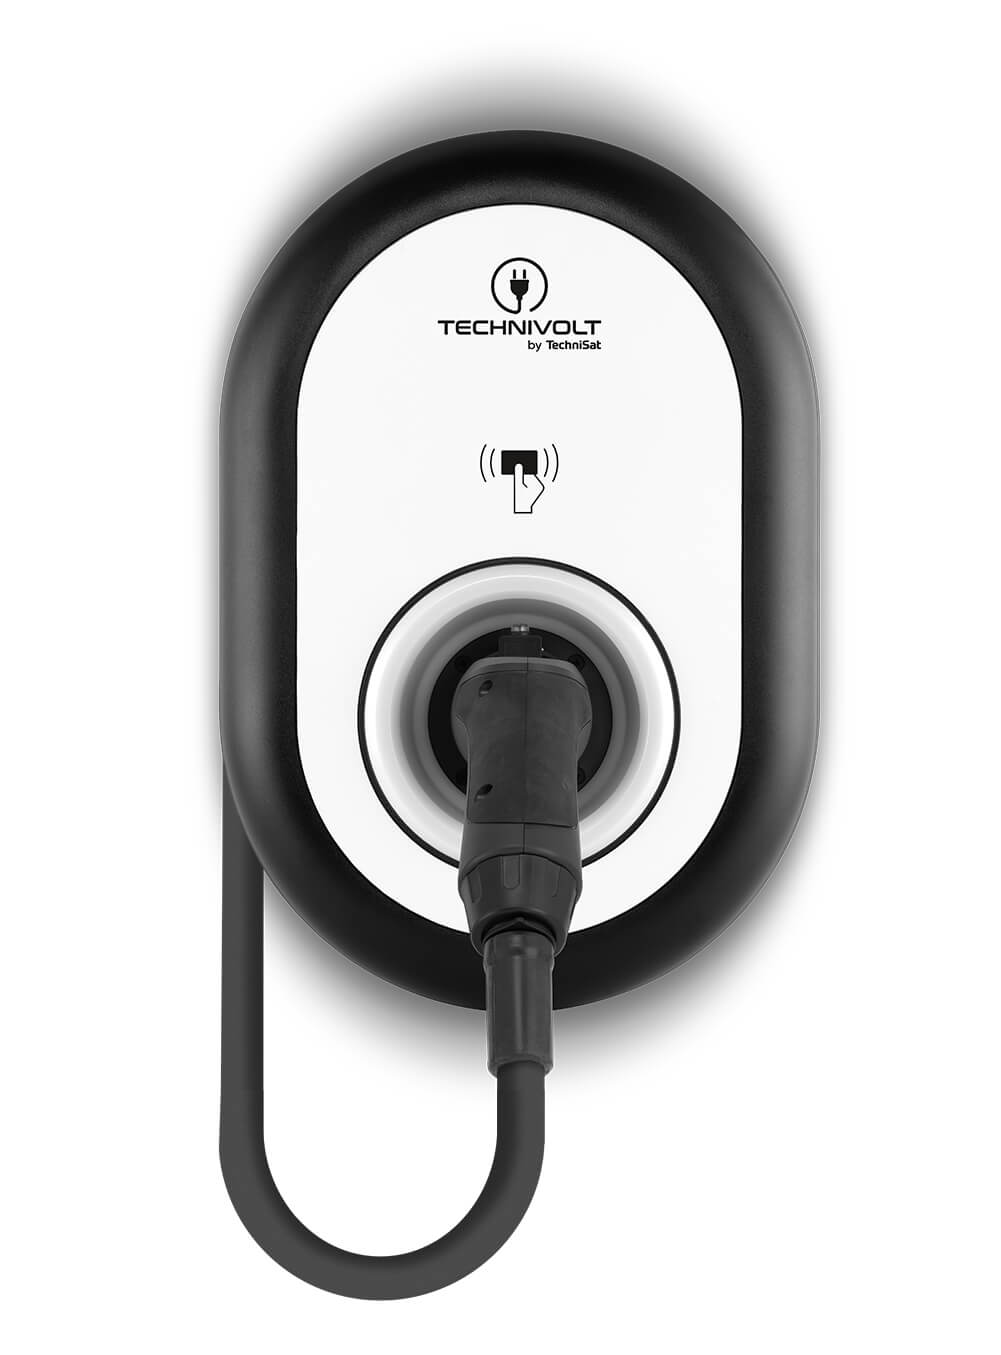 TECHNIVOLT 101:11 kW charging station with permanently connected charging cable according to IEC 62196-2 type 2